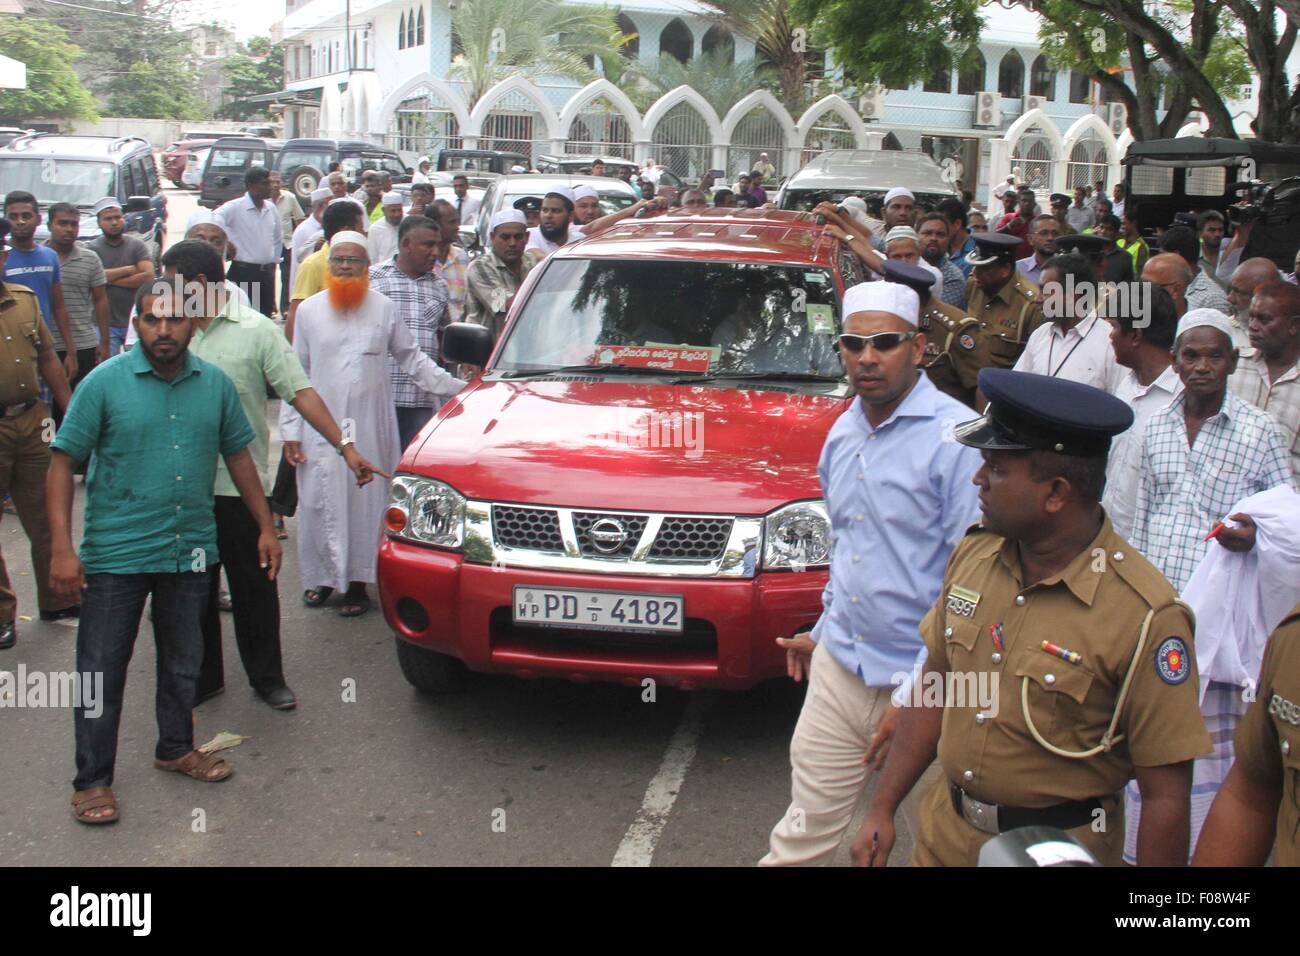 Colombo. 10th Aug, 2015. Photo taken on Aug. 10, 2015 shows a scene of a massive protest outside a Muslim burial ground in support of fresh investigations over the death of a former national rugby player, in Colombo, Sri Lanka. The Sri Lankan police on Monday exhumed the body of a former national rugby player Wasim Thajudeen and launched fresh investigations over his death. © Jamila/Xinhua/Alamy Live News Stock Photo